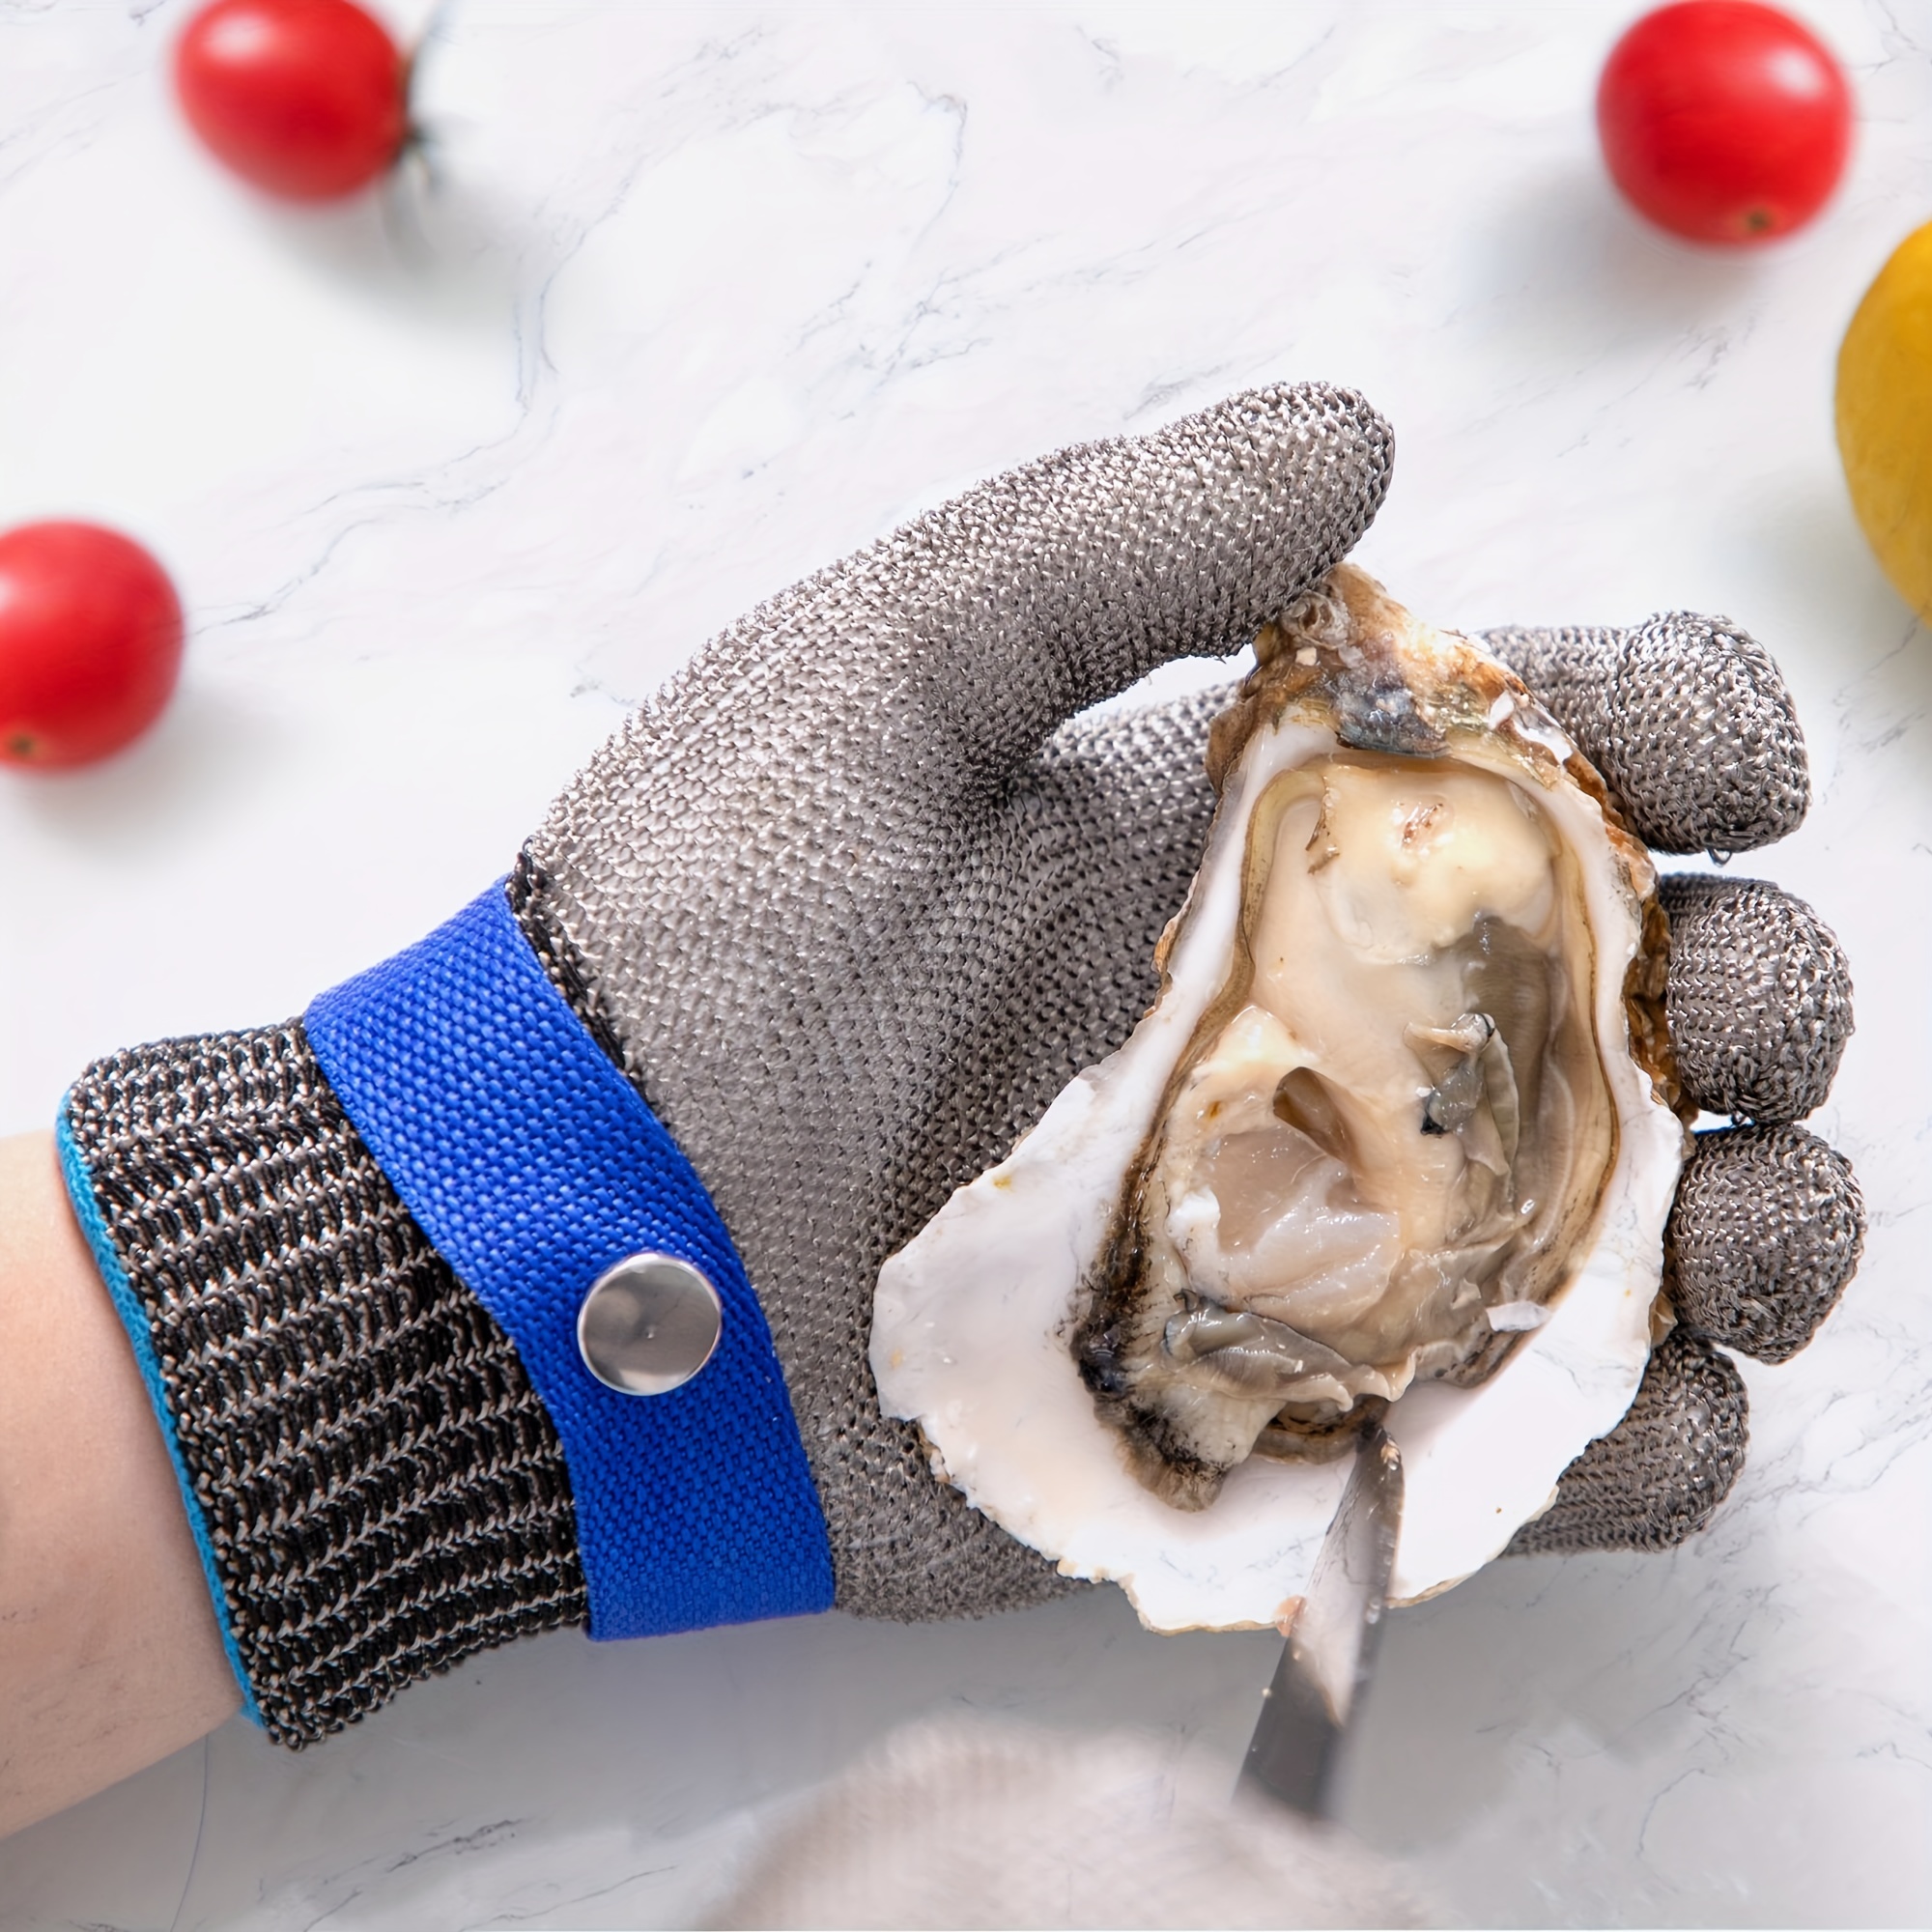 Protect Your Hands With Cut Resistant Gloves - Perfect For Oyster